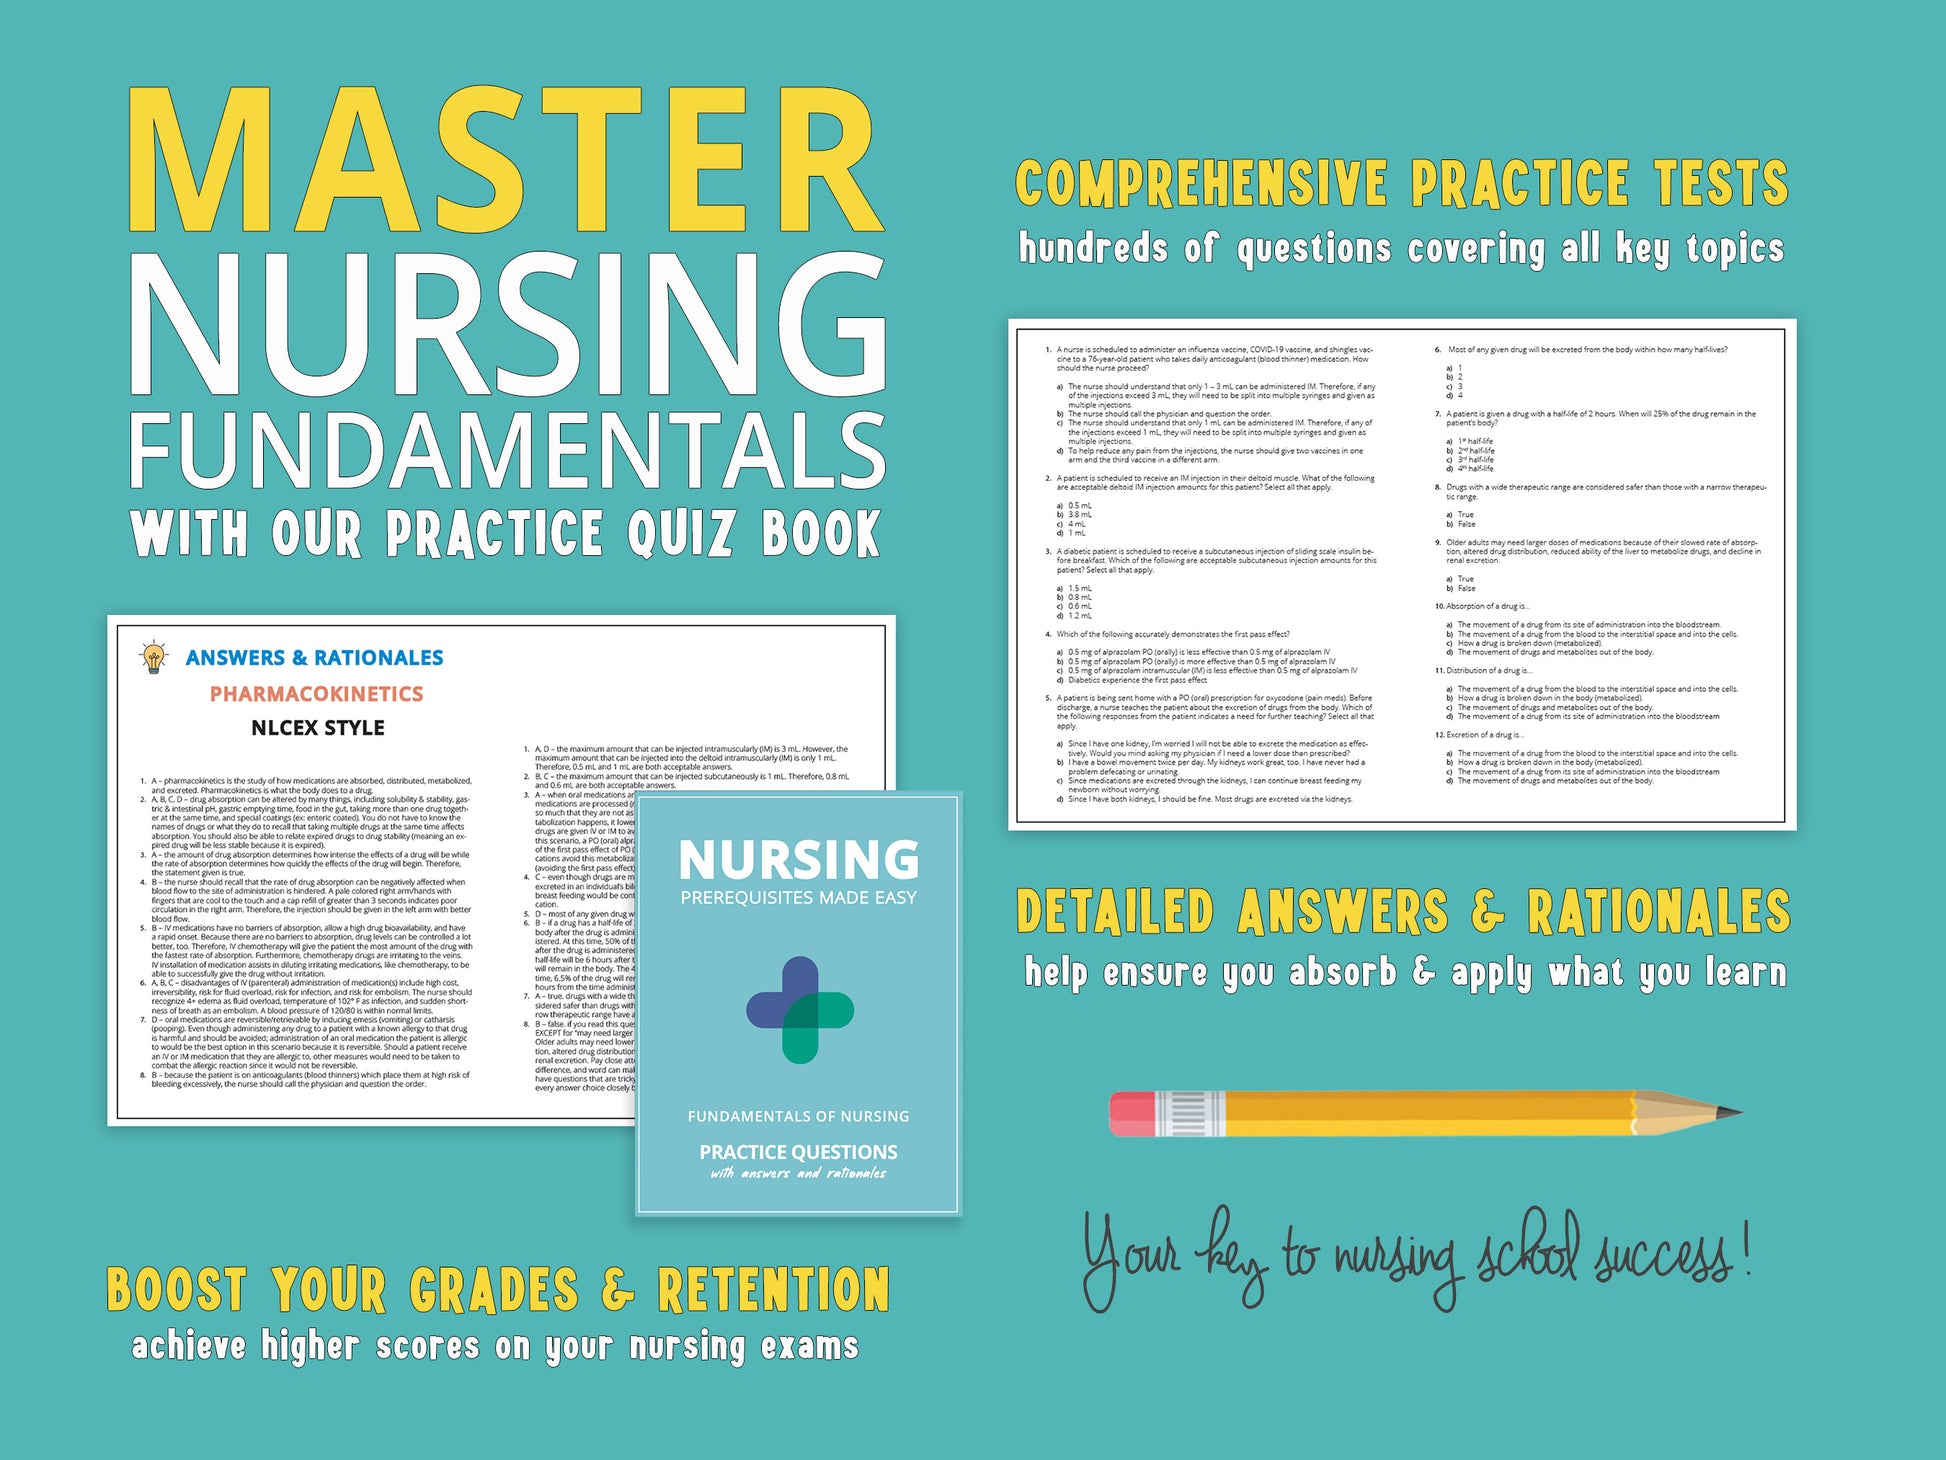 Fundamentals of Nursing Study Guide book displayed with an example of a practice quiz, including answers and rationale. Comprehensive study aid featuring detailed chapters, essential nursing concepts, and practice questions for nursing students.